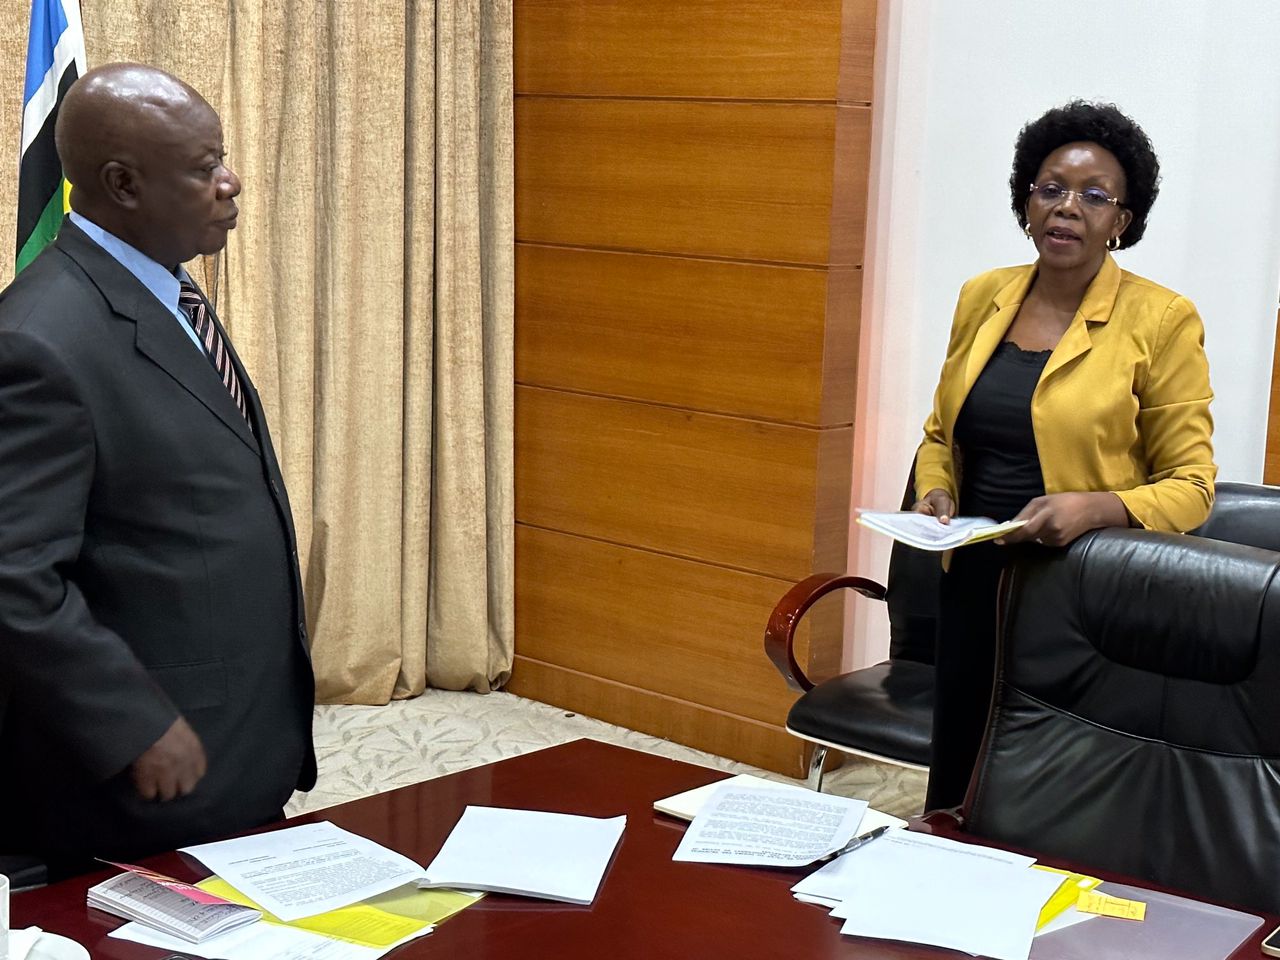 Dunstan Balaba takes over as new OPM permanent secretary